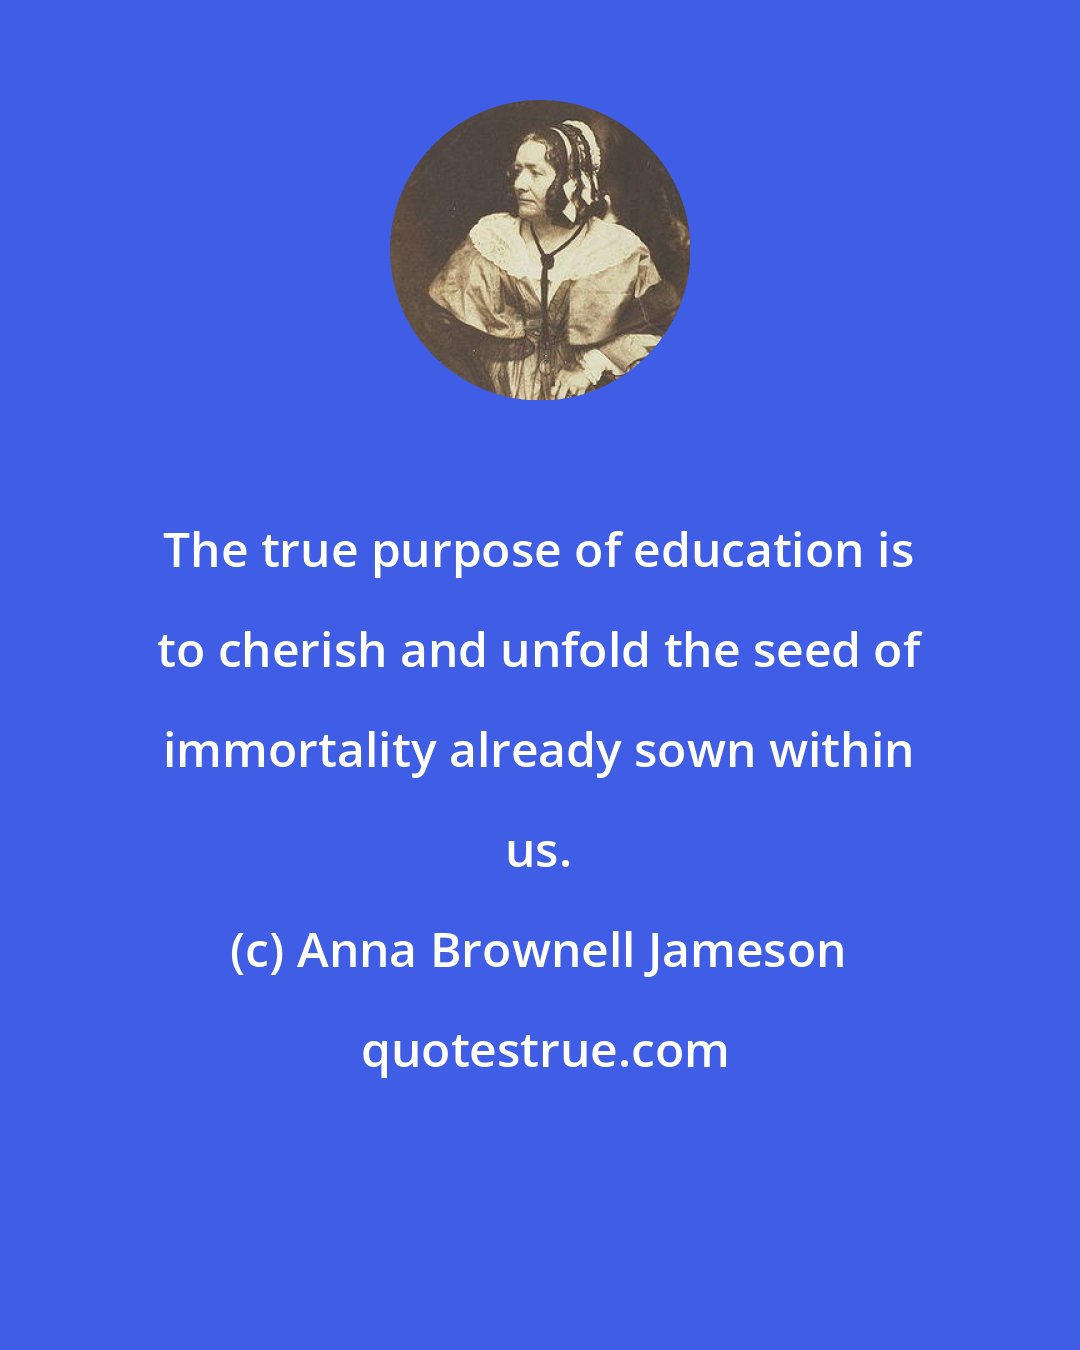 Anna Brownell Jameson: The true purpose of education is to cherish and unfold the seed of immortality already sown within us.